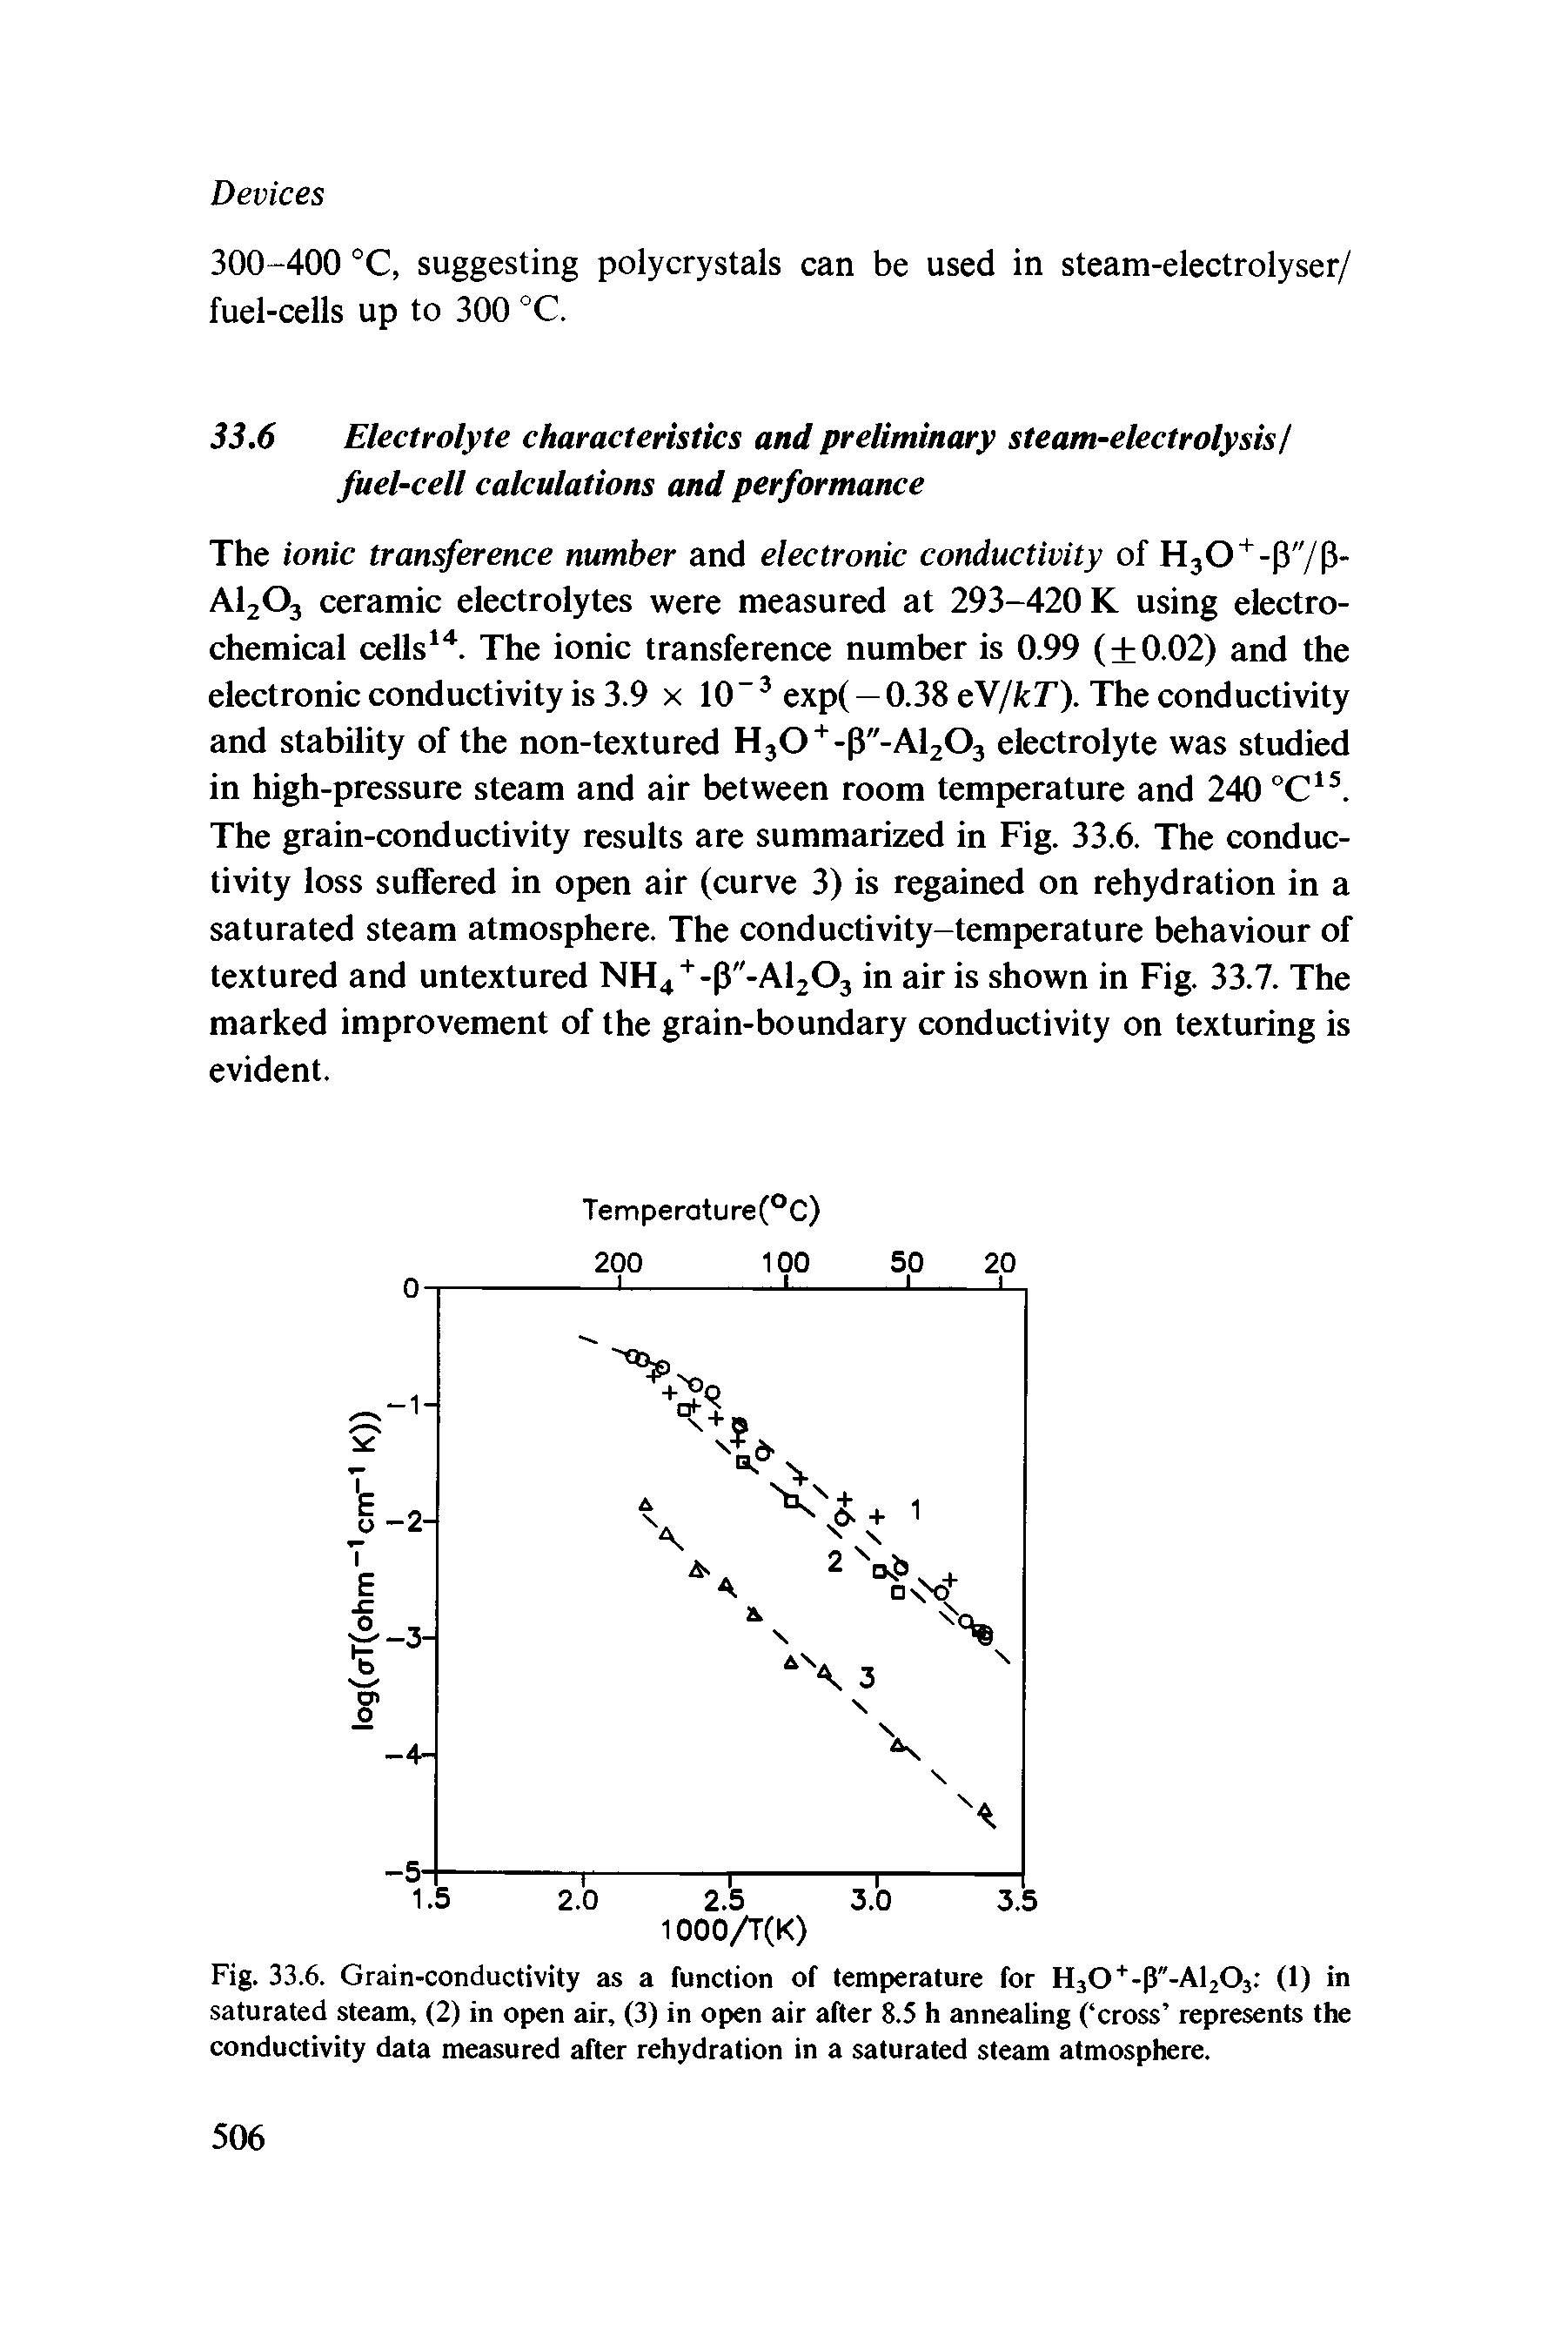 Fig. 33.6. Grain-conductivity as a function of temperature for H30 -P"-Al20j (1) in saturated steam, (2) in open air, (3) in open air after 8.5 h annealing ( cross represents the conductivity data measured after rehydration in a saturated steam atmosphere.